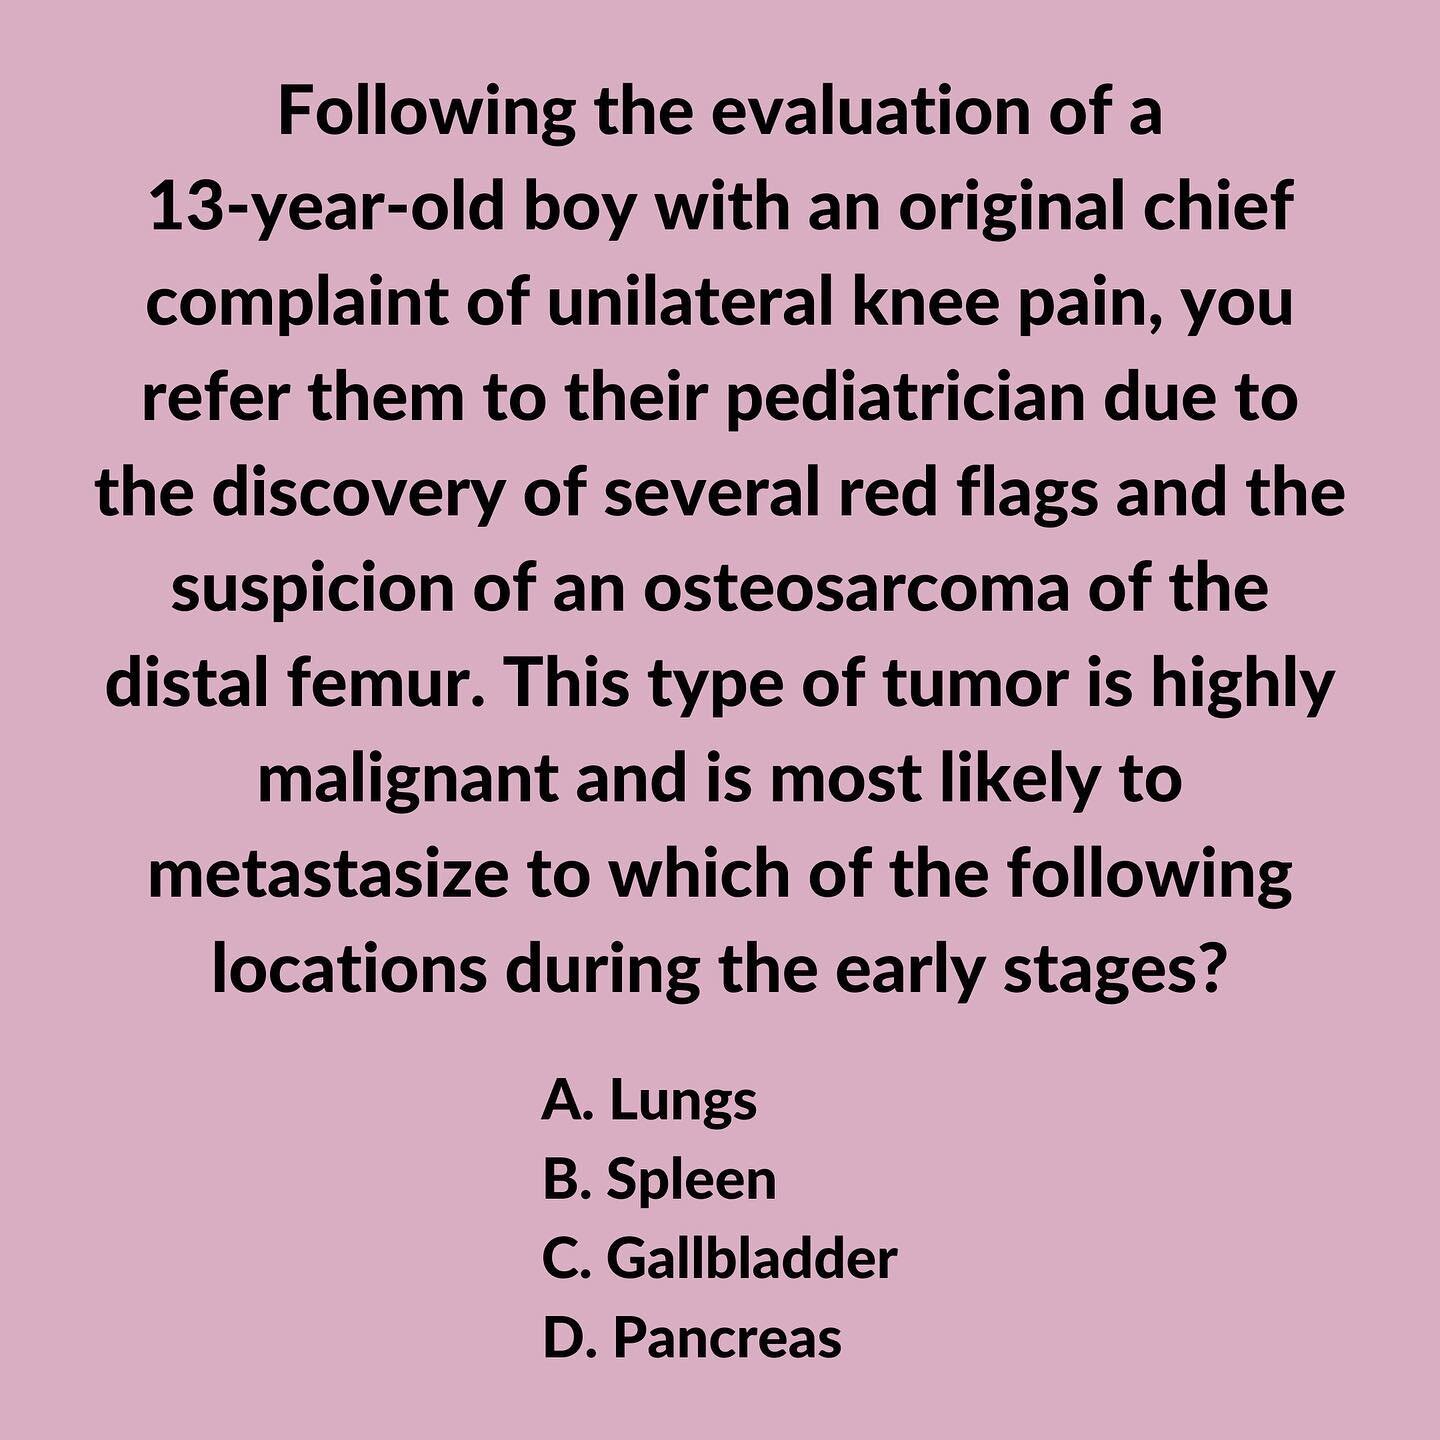 Let&rsquo;s talk about osteosarcomas! 🦴

✅ CORRECT ANSWER: A

💡 EXPLANATION:

⭐️ An osteosarcoma is a highly malignant bone tumor and the second most common type of primary bone tumor. Because it most often affects long bones with an active growth 